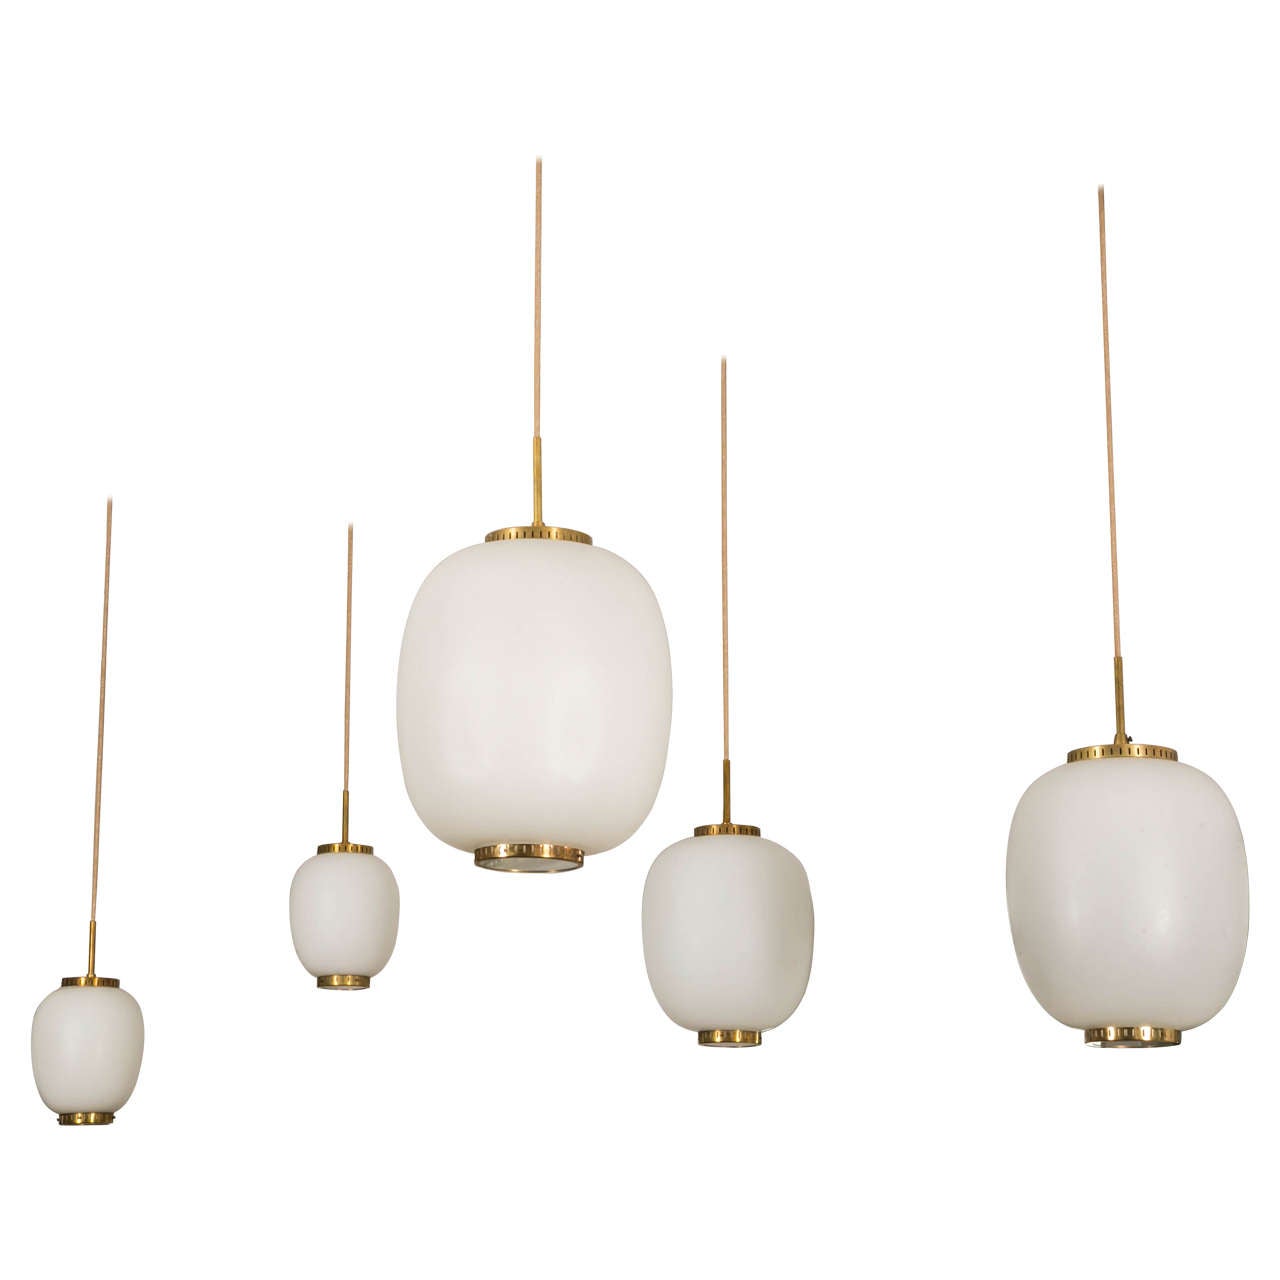 Rare Set of Five Ceiling Fixtures by Karlby for Lyfa, Denmark, 1960